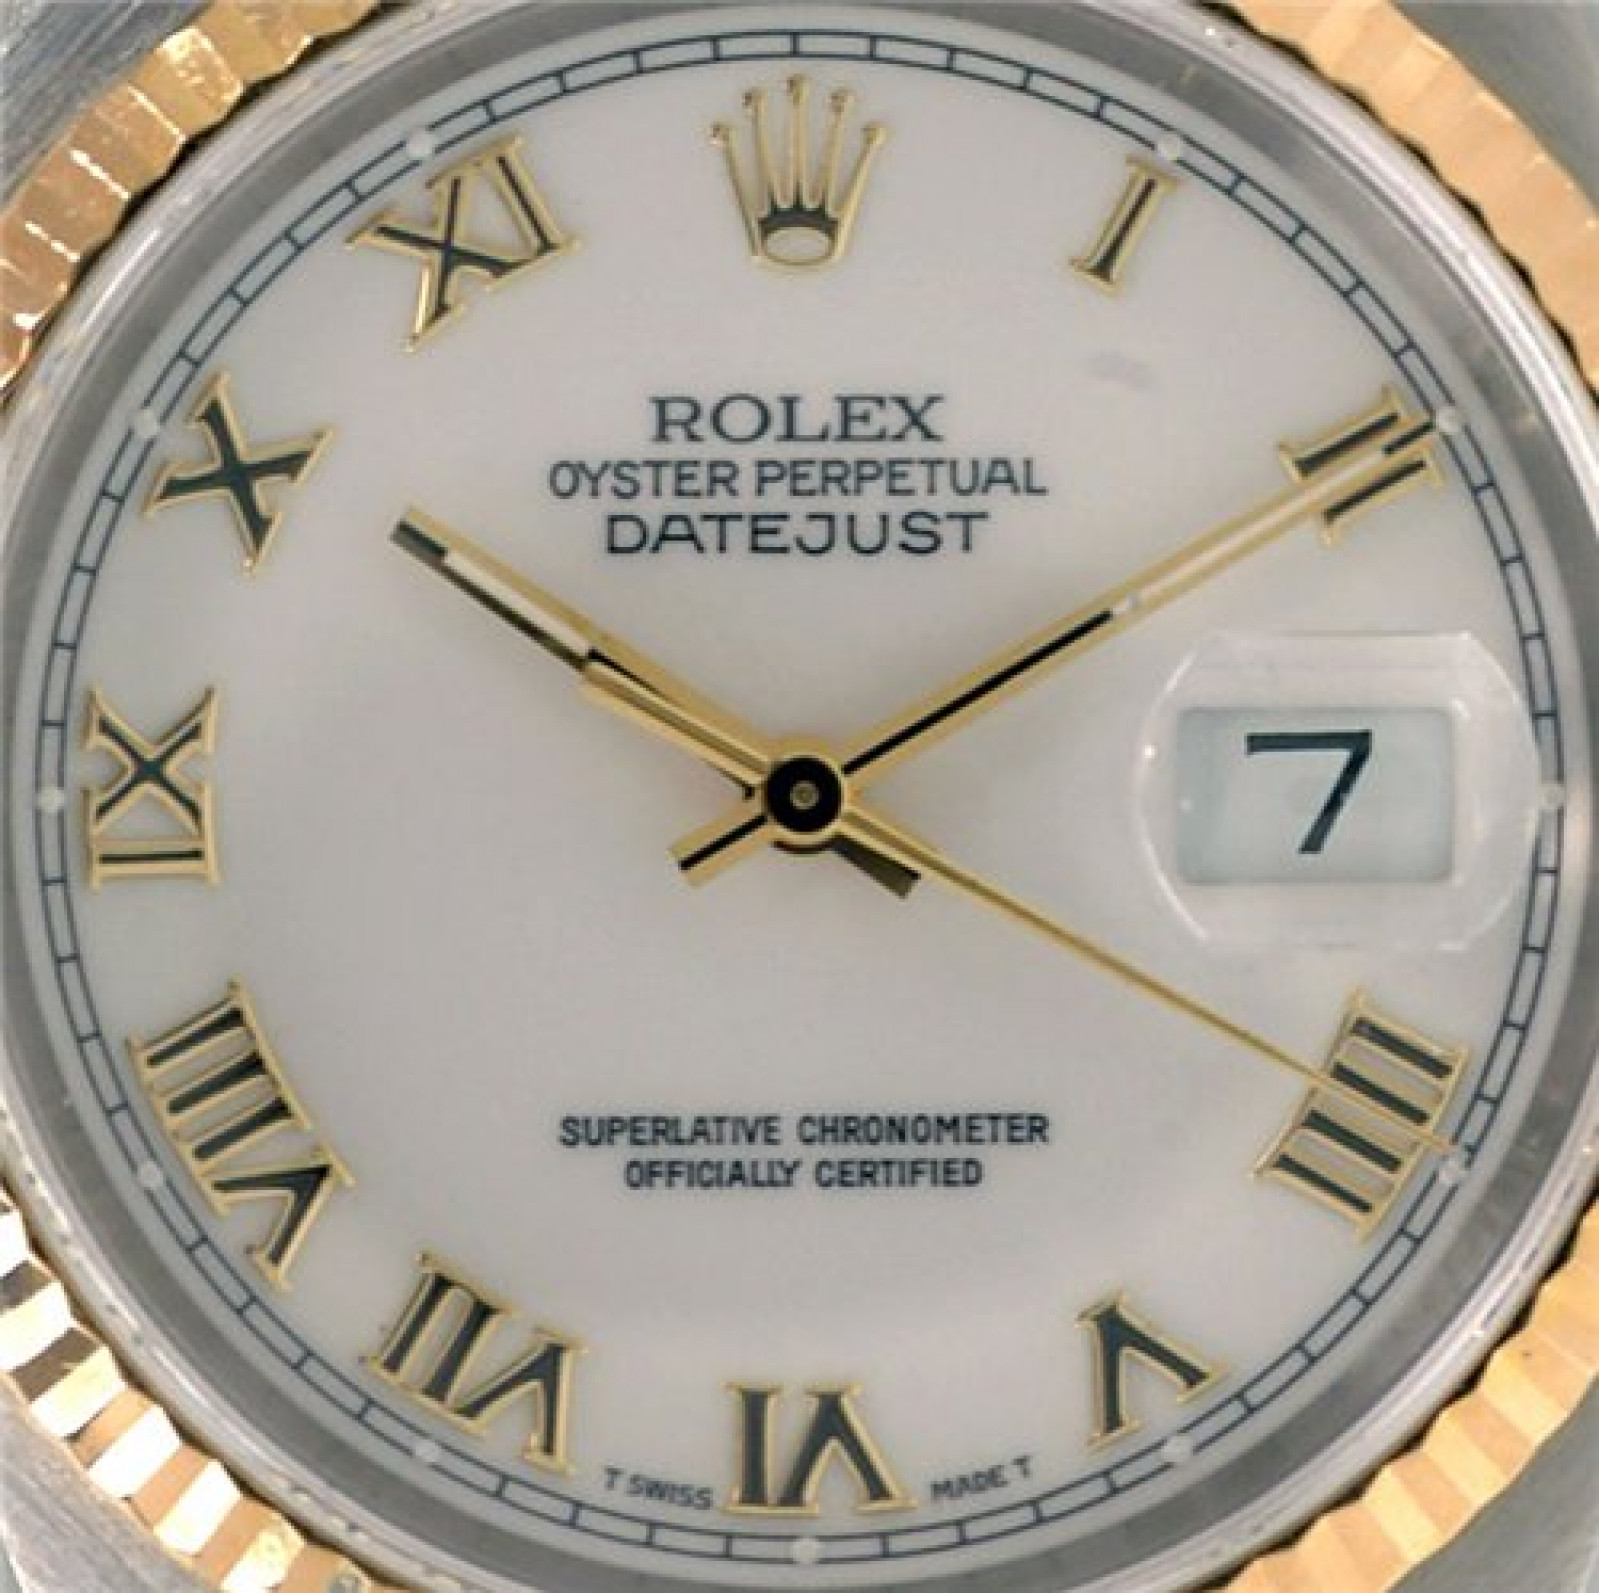 Rolex Datejust 16233 Gold & Steel With White Dial